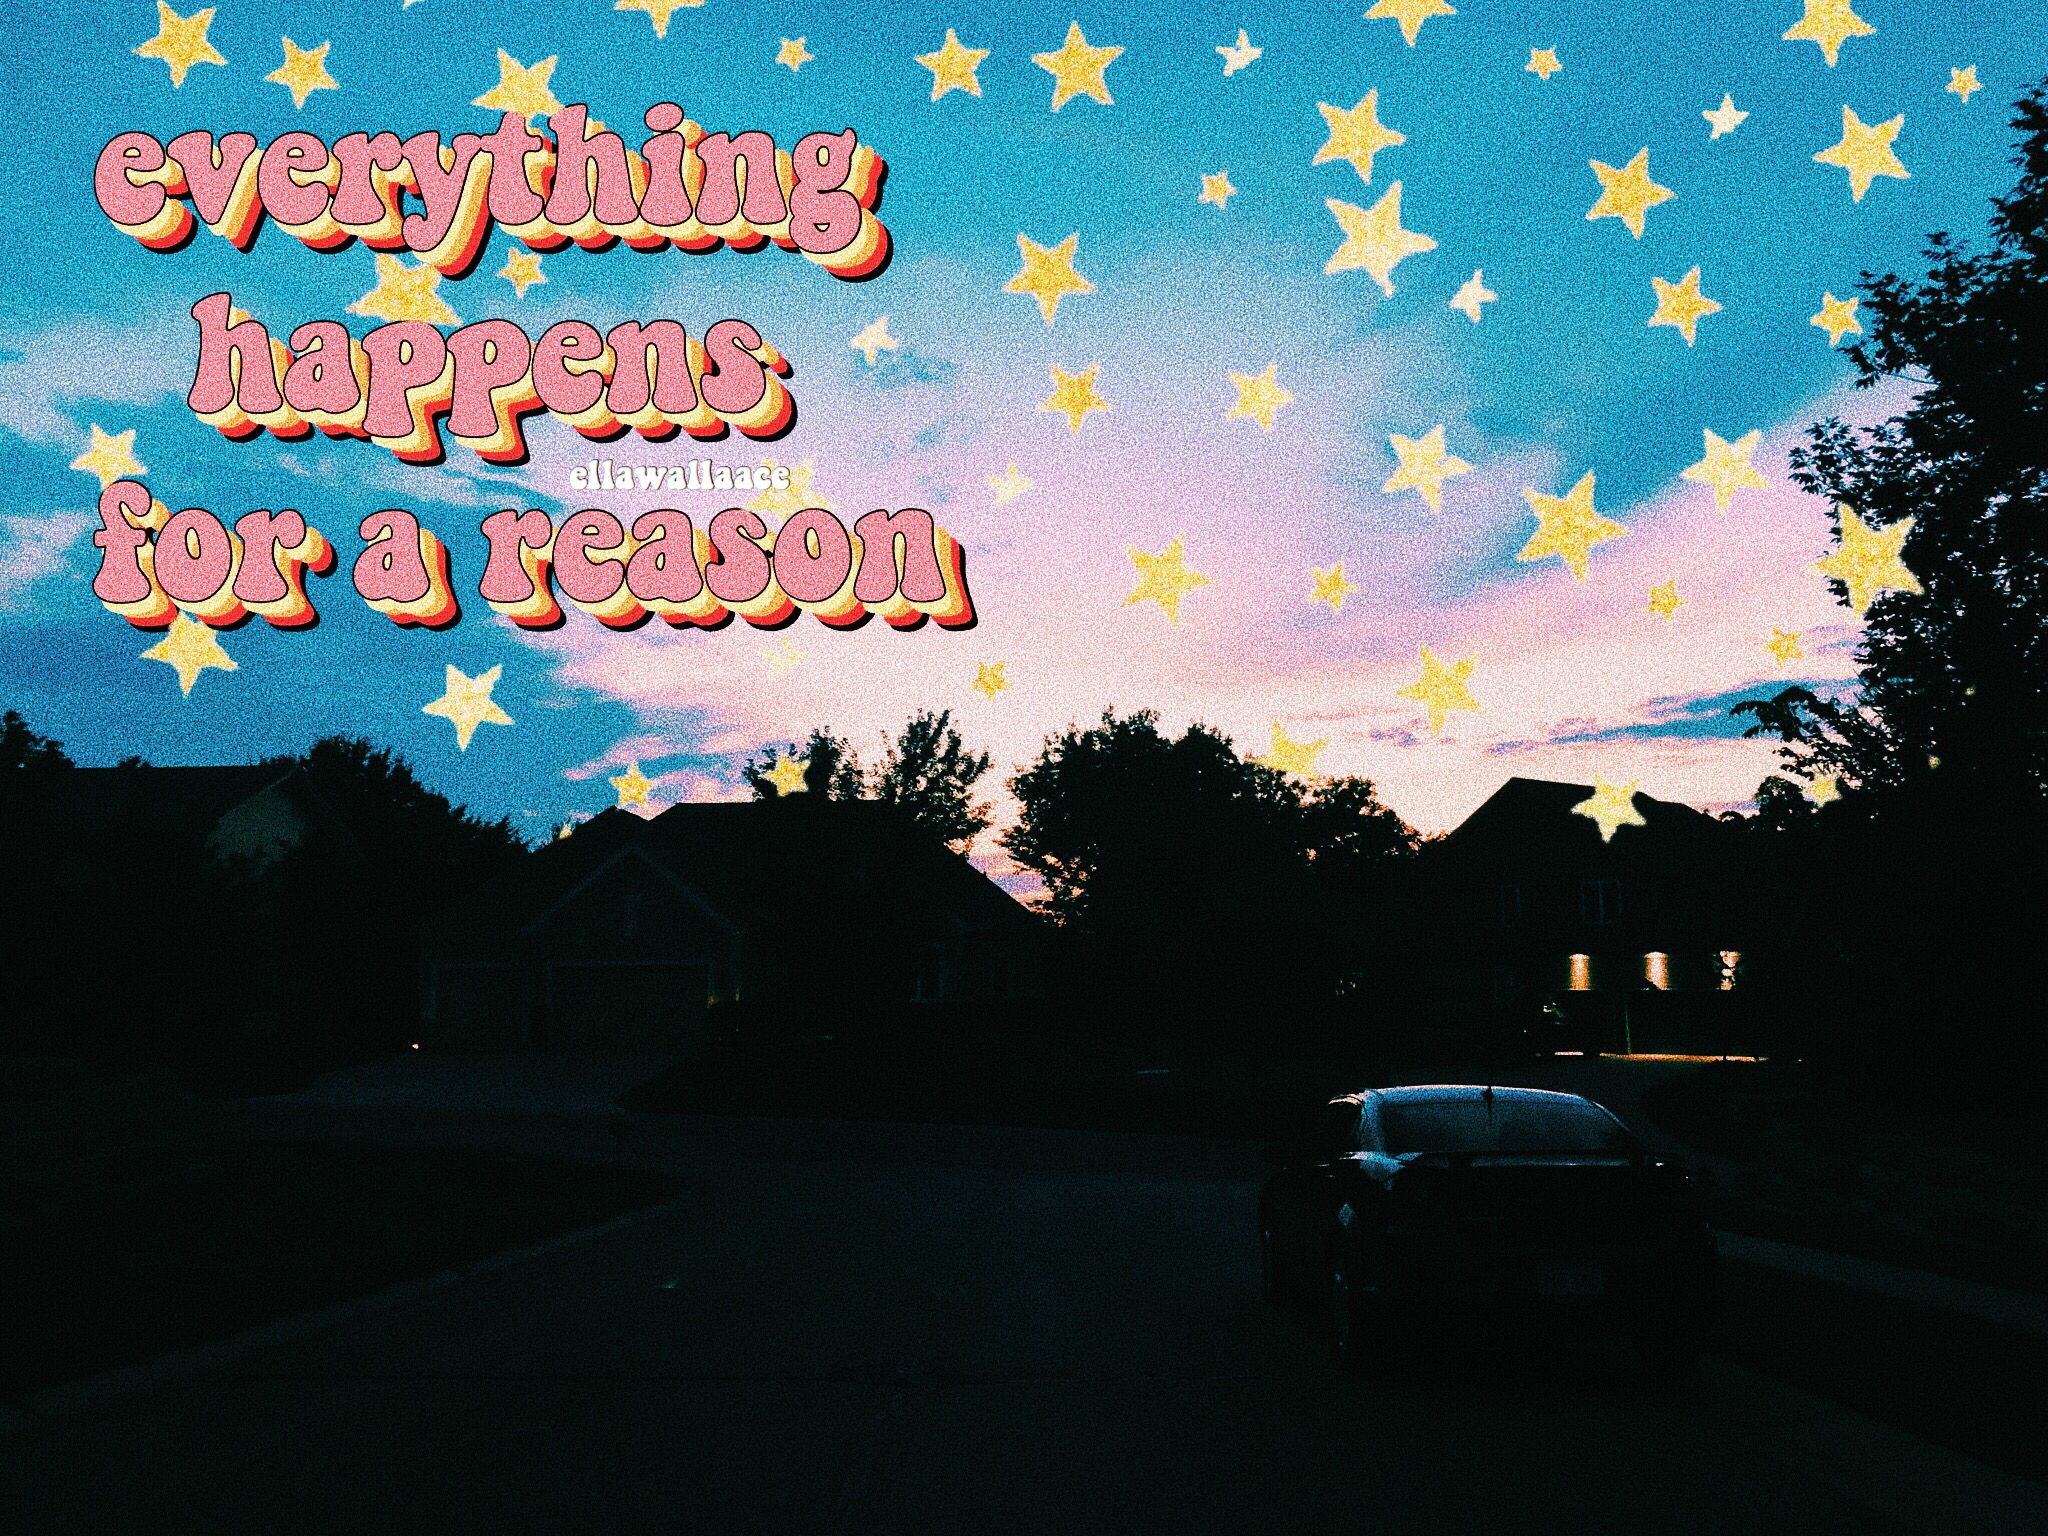 Everything Happens For A Reason Quotes Wallpaper